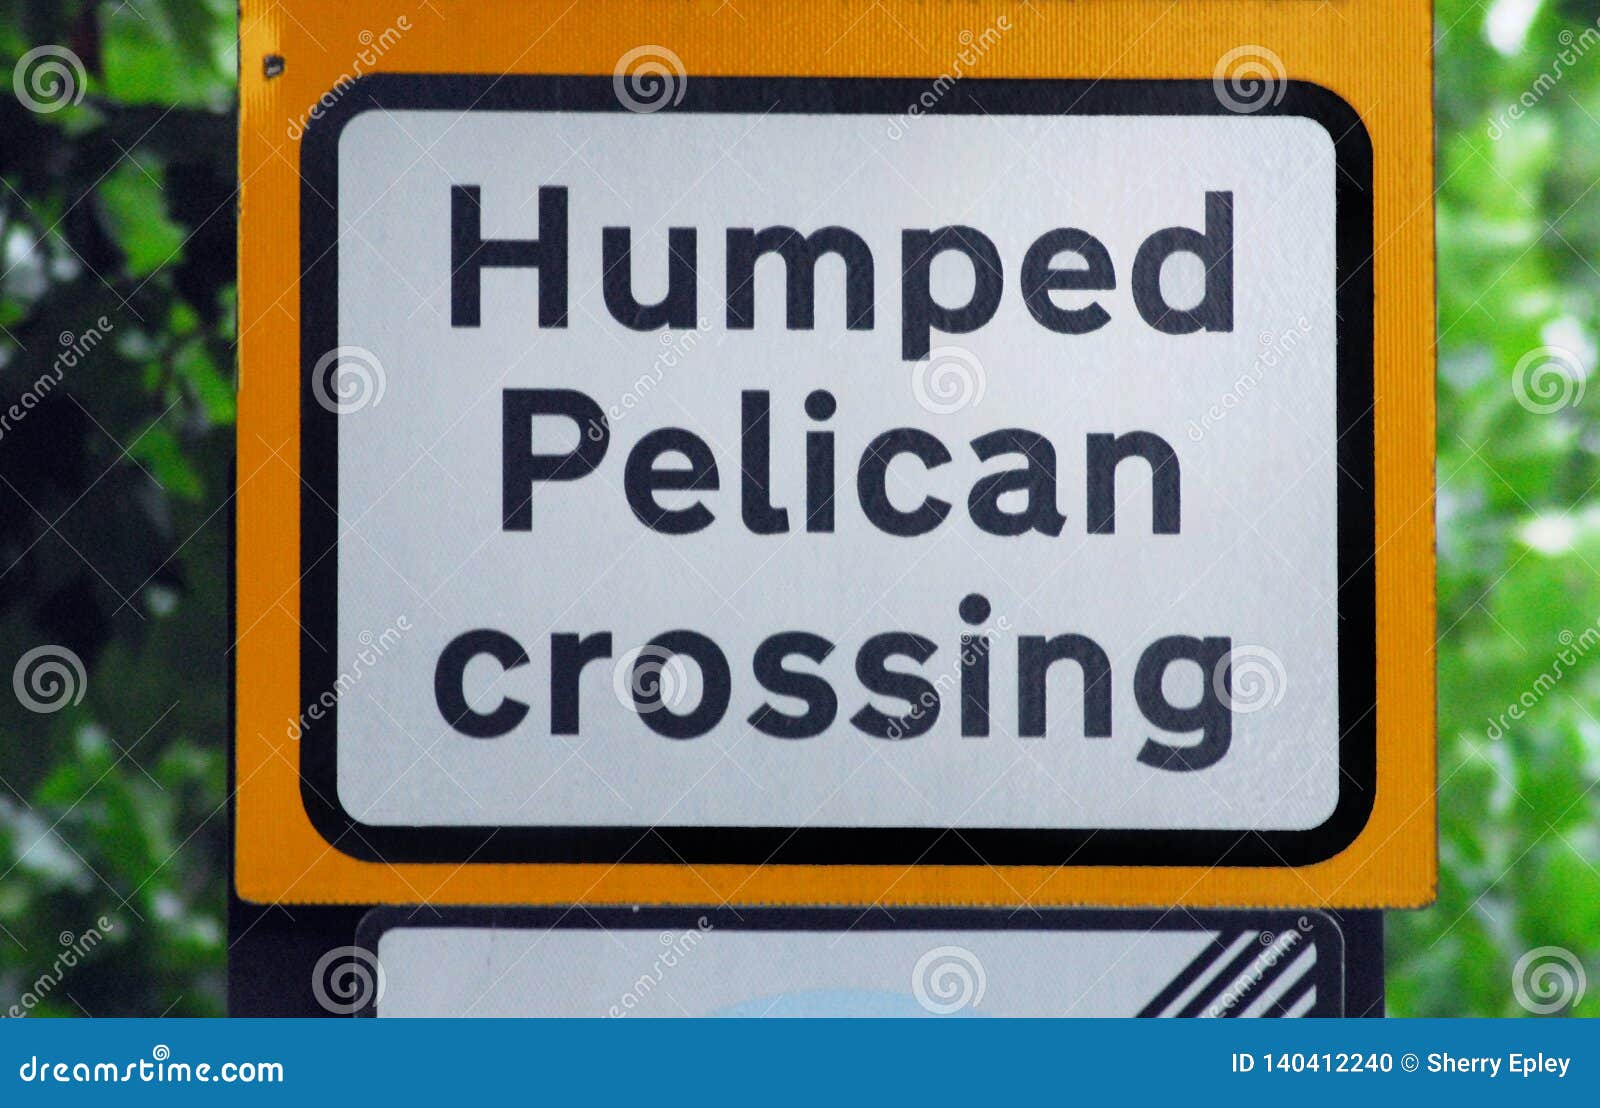 SIGNS- HUMOR- Humped Pelican Crossing Stock Photo - Image of safety,  orange: 140412240